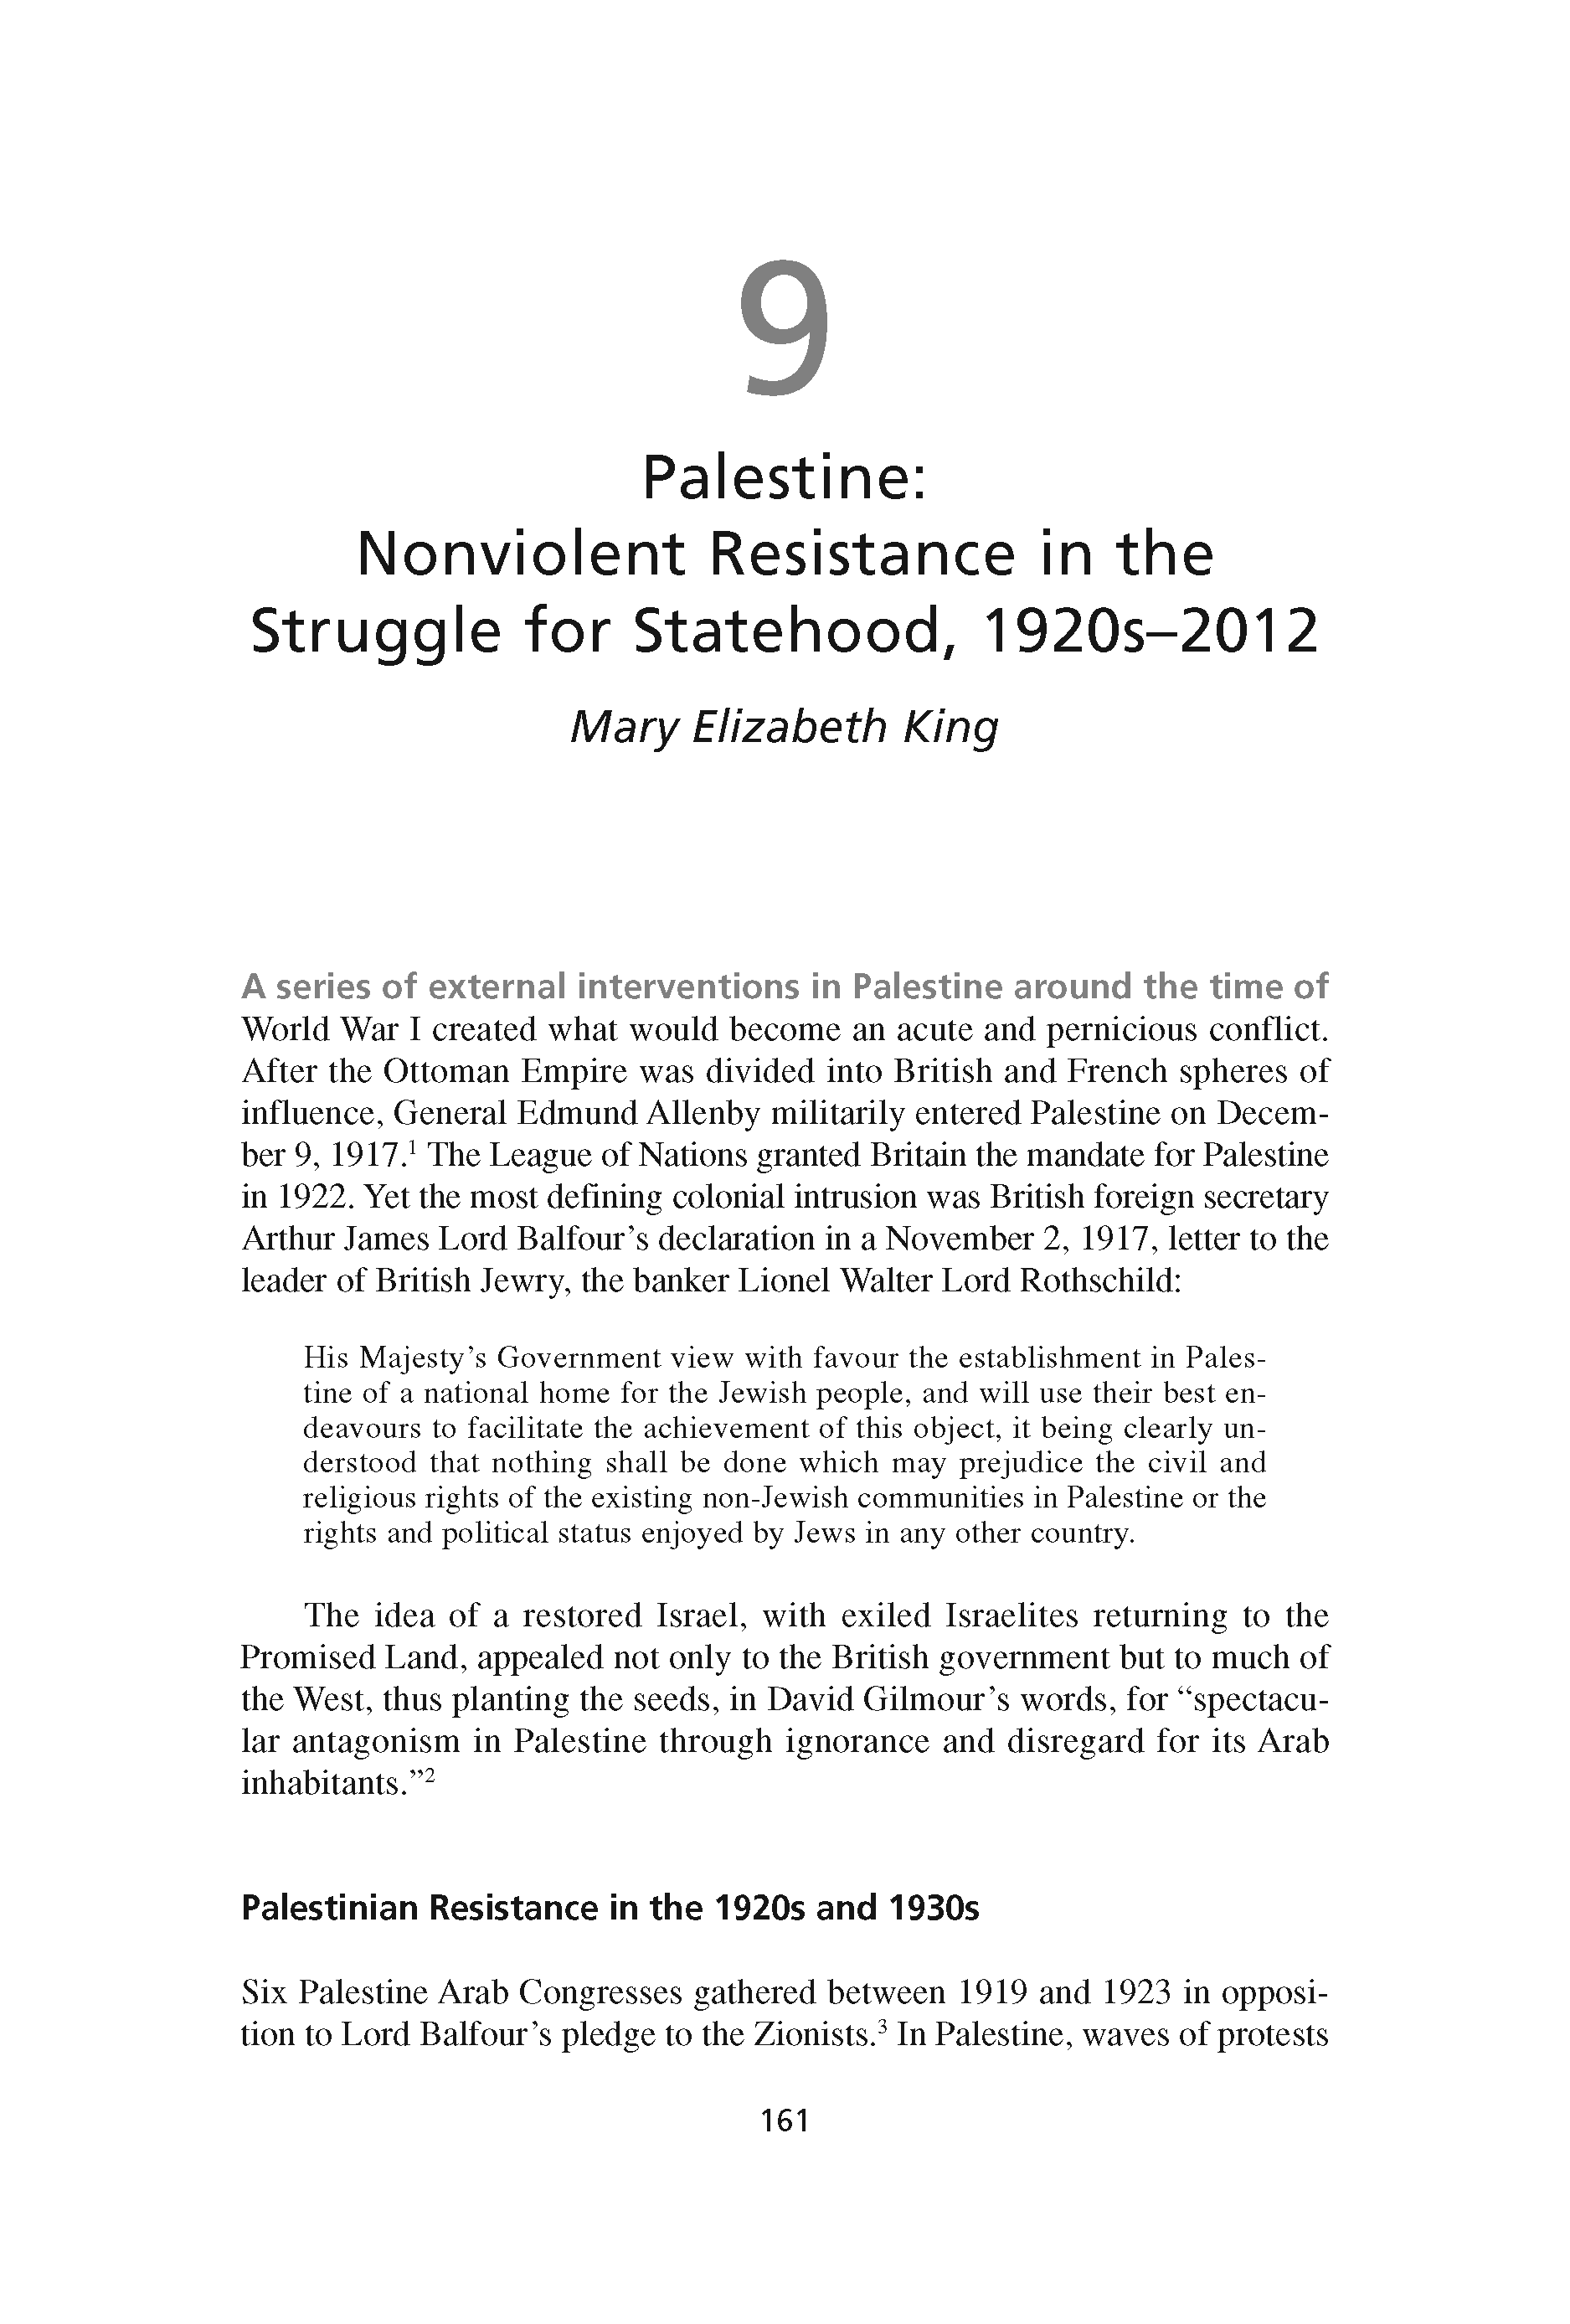 Palestine: Nonviolent Resistance in the Struggle for Statehood, 1920s-2012 (Chapter 9 from ‘Recovering Nonviolent History’)